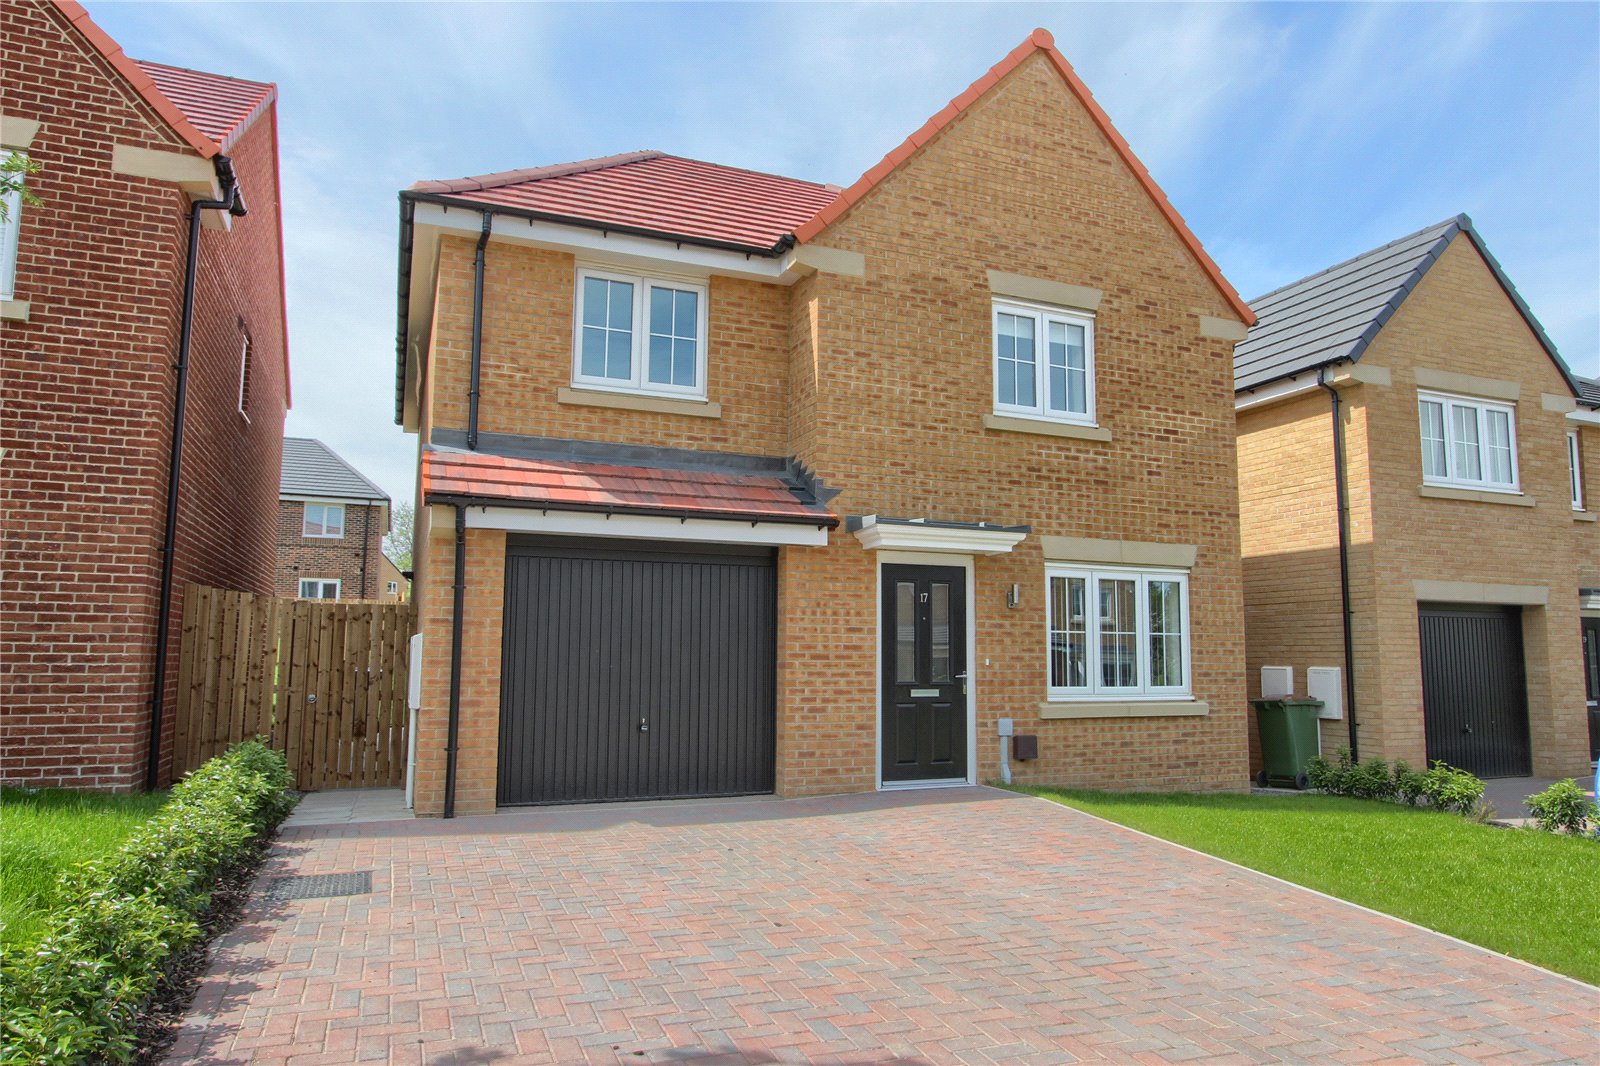 4 bed house for sale in Whinfell Drive, Normanby - Property Image 1